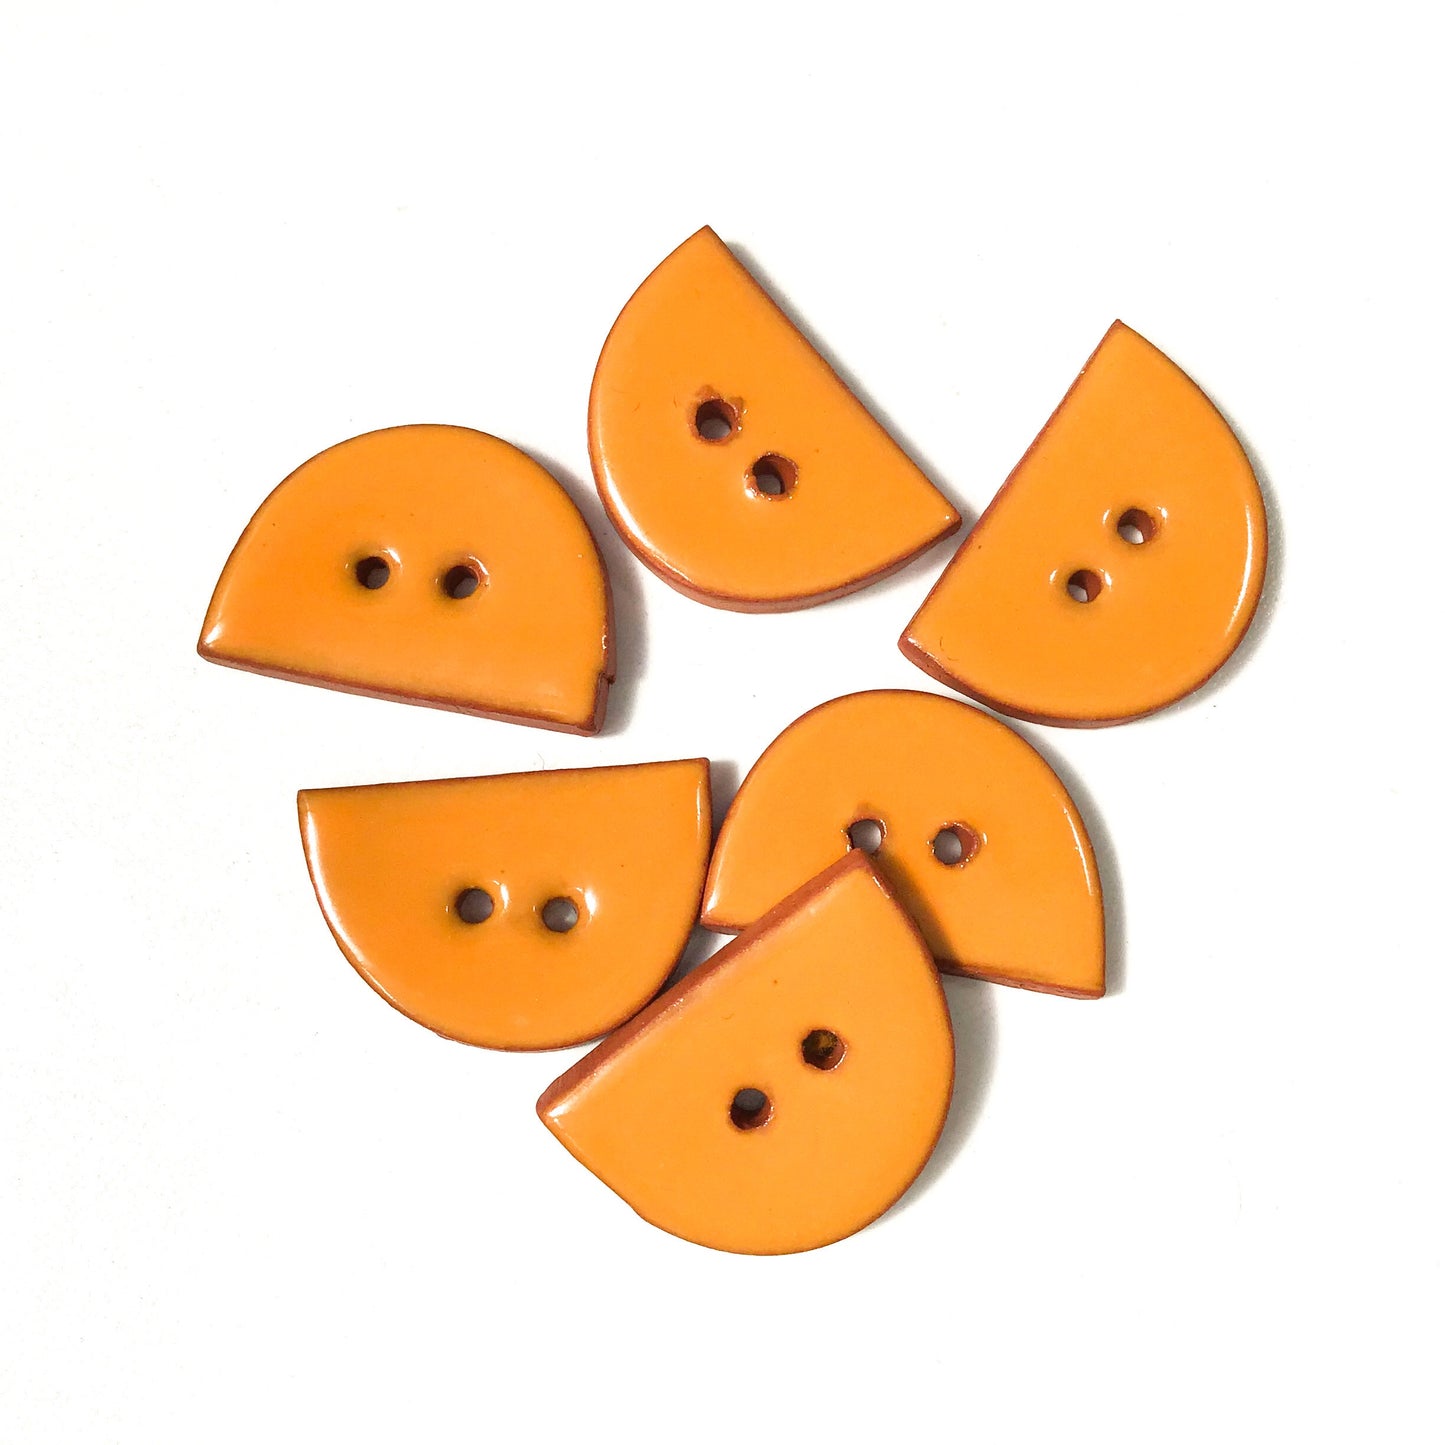 Orange Ceramic Buttons - Half Circle Clay Buttons - 5/8" x 15/16" - 6 Pack